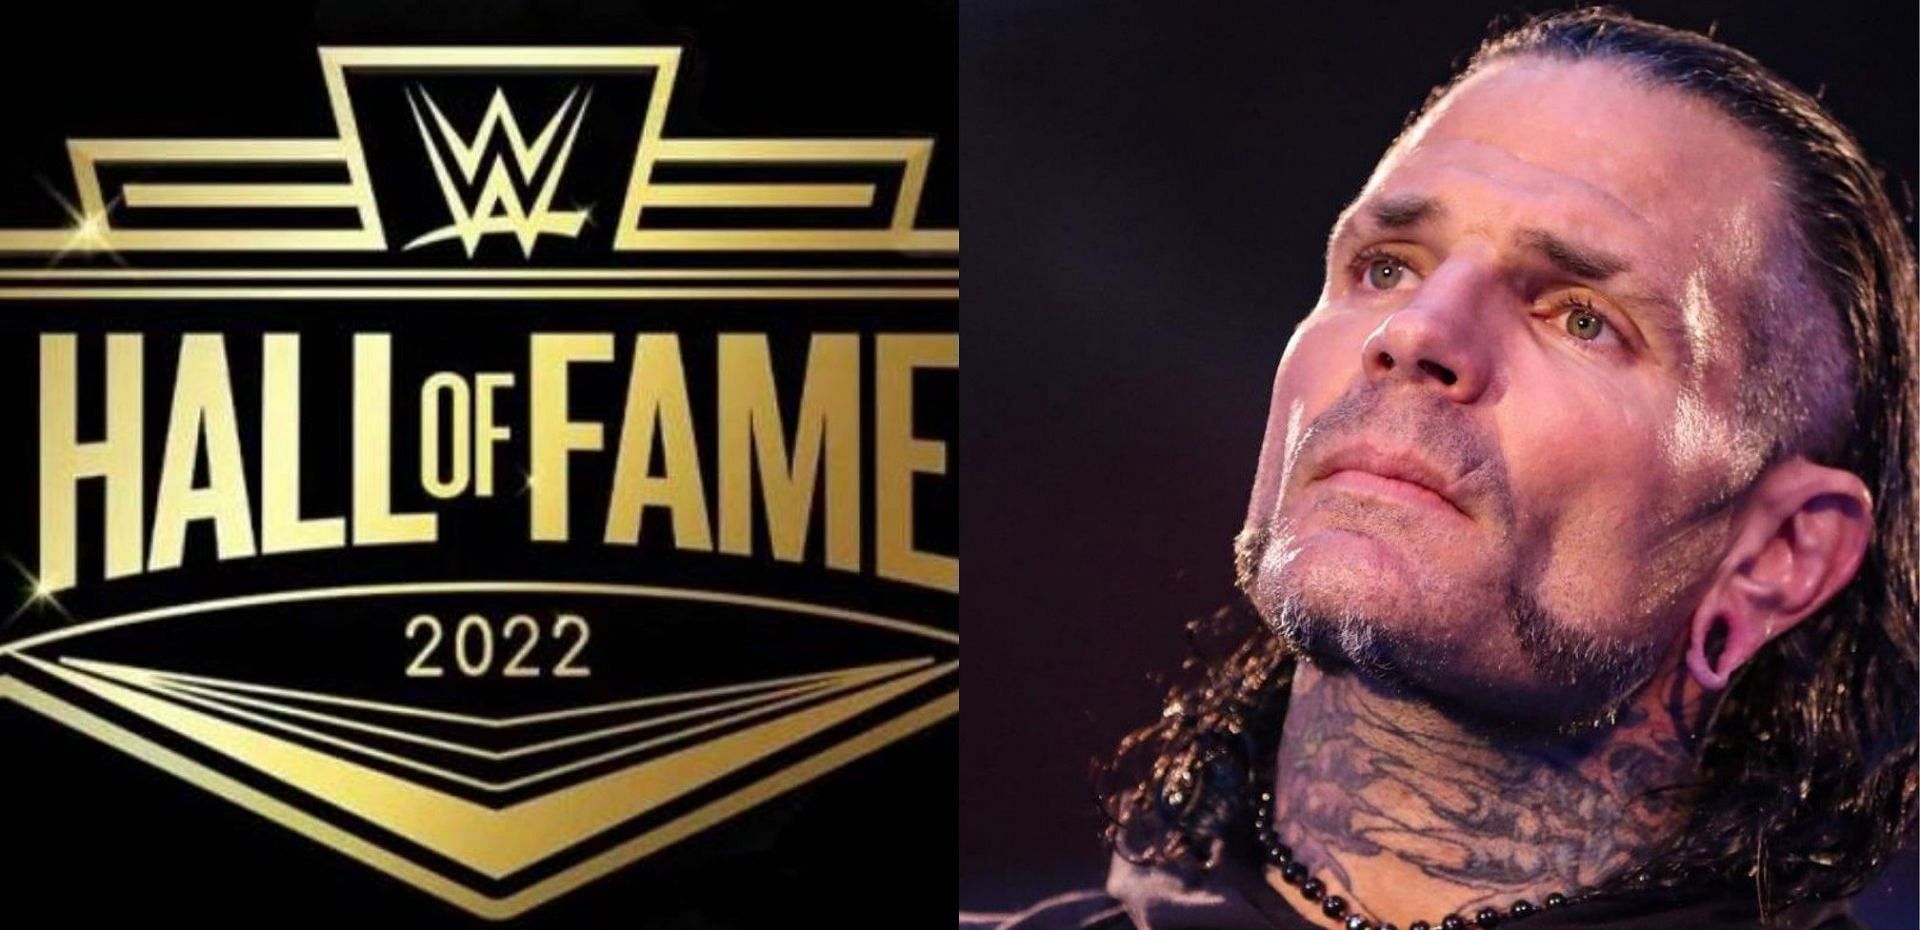 WWE wanted Jeff Hardy to be in the Hall of Fame this year